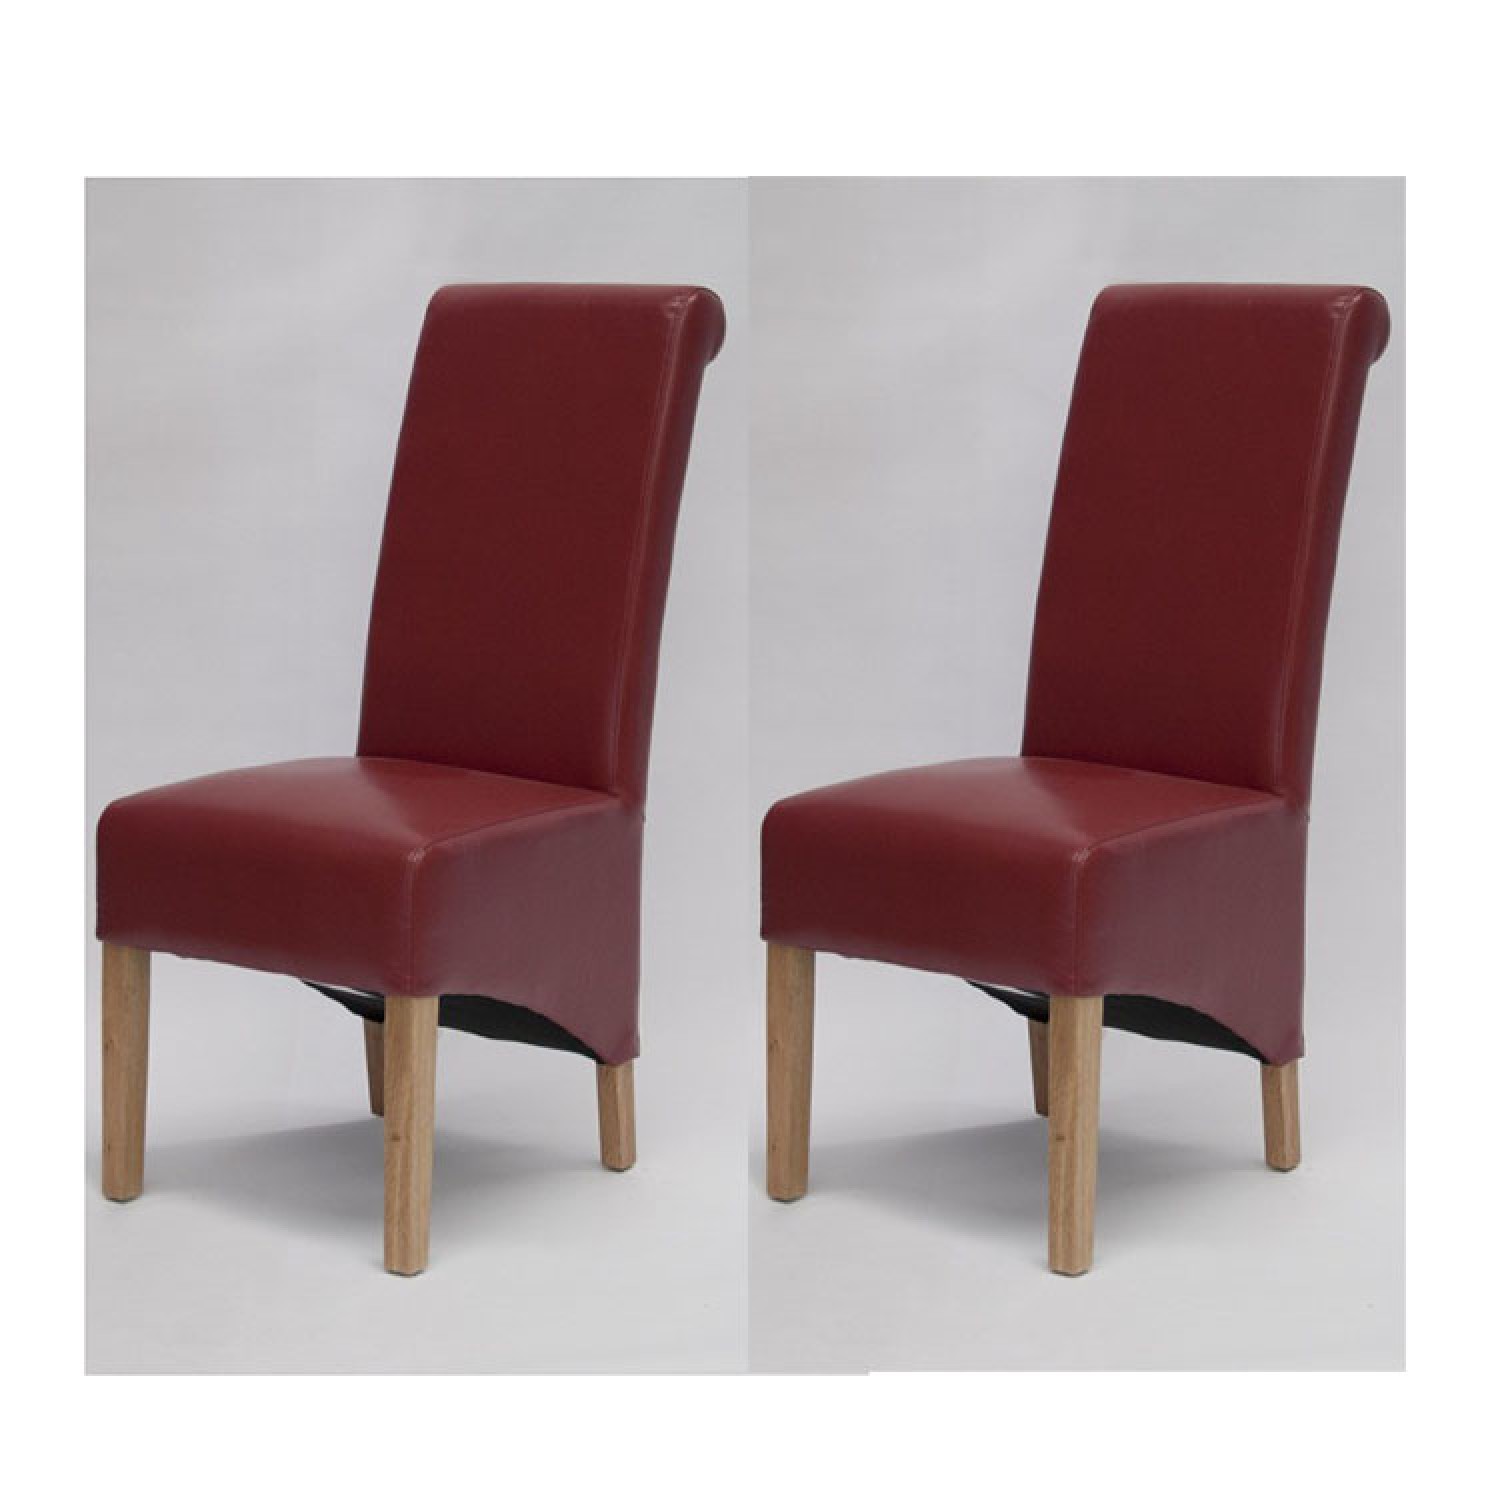 Trend Oak Richmond Red Bonded Leather Dining Chair Pair Oak Furniture House